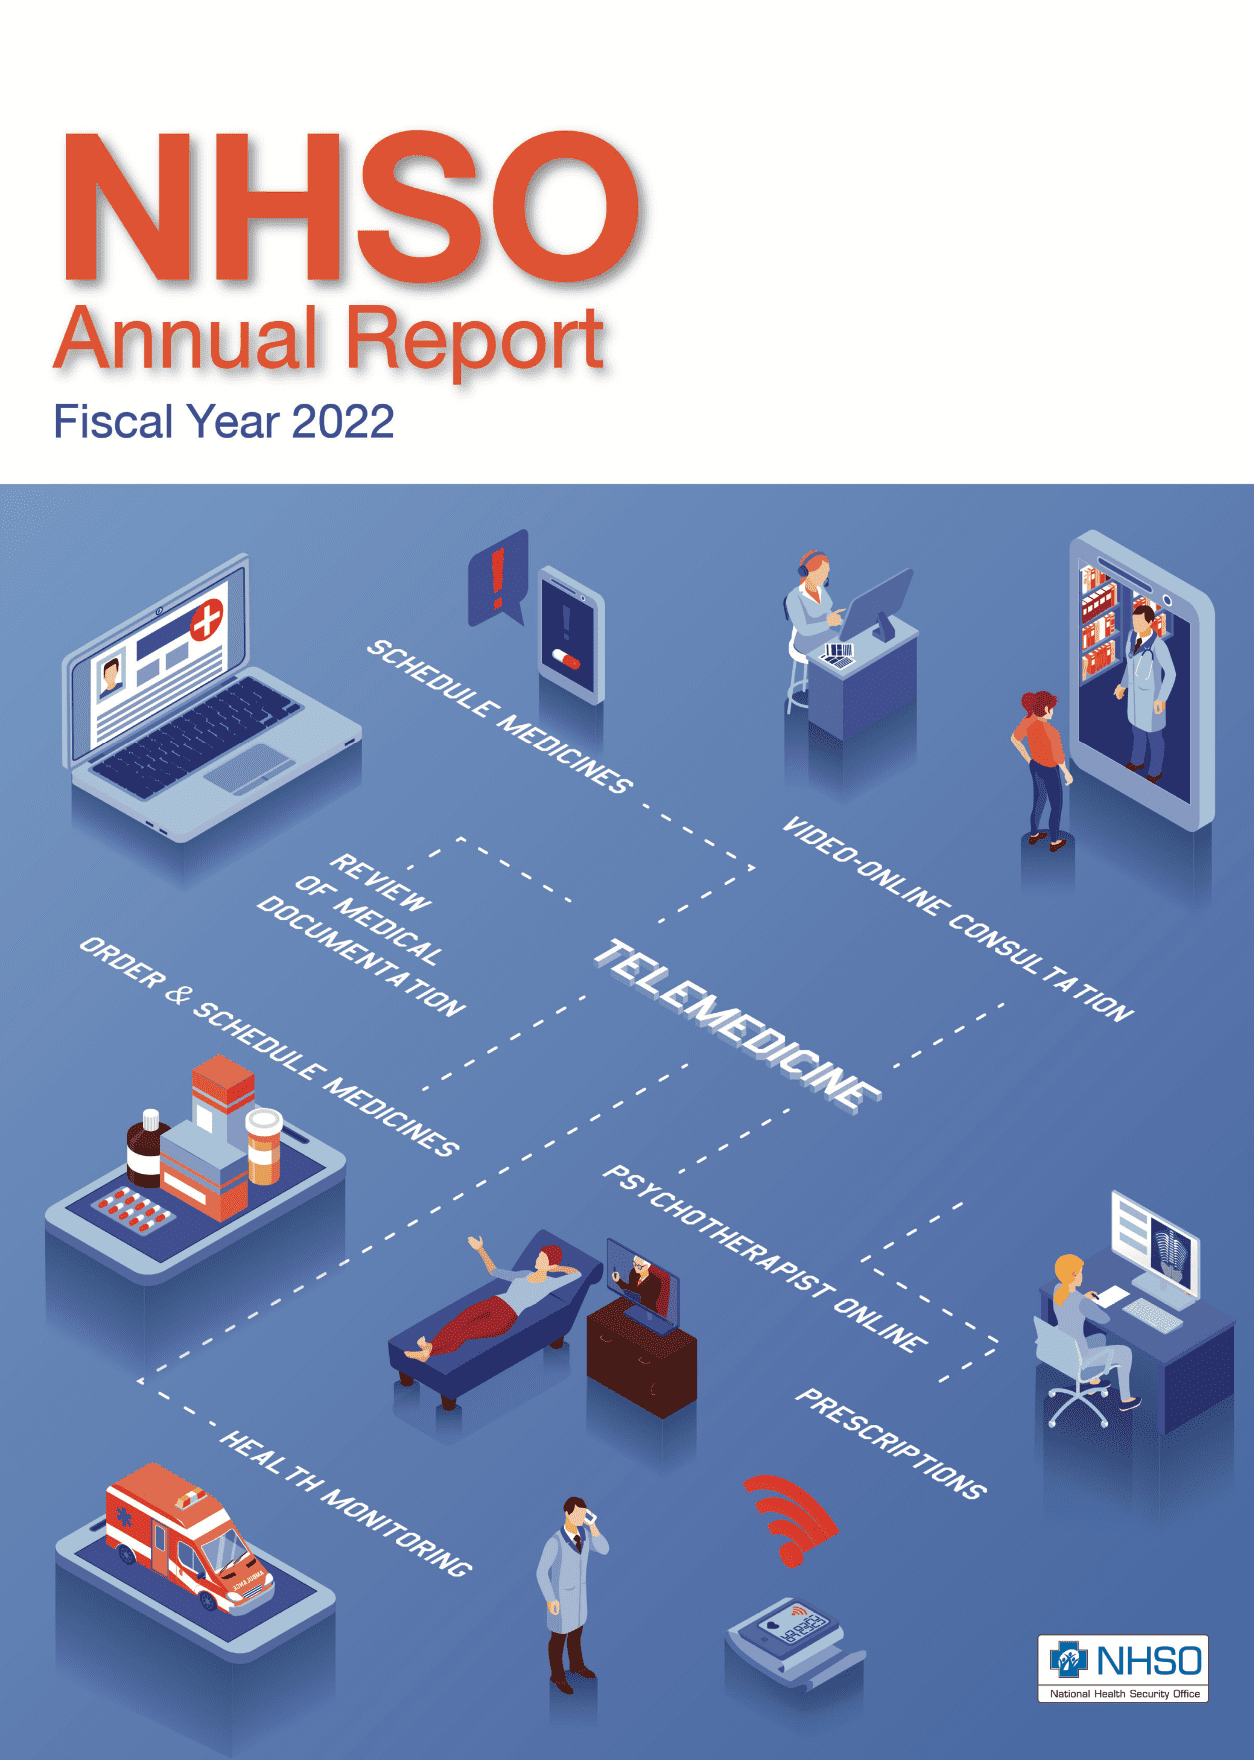 NHSO Annual Report Fiscal Year 2022